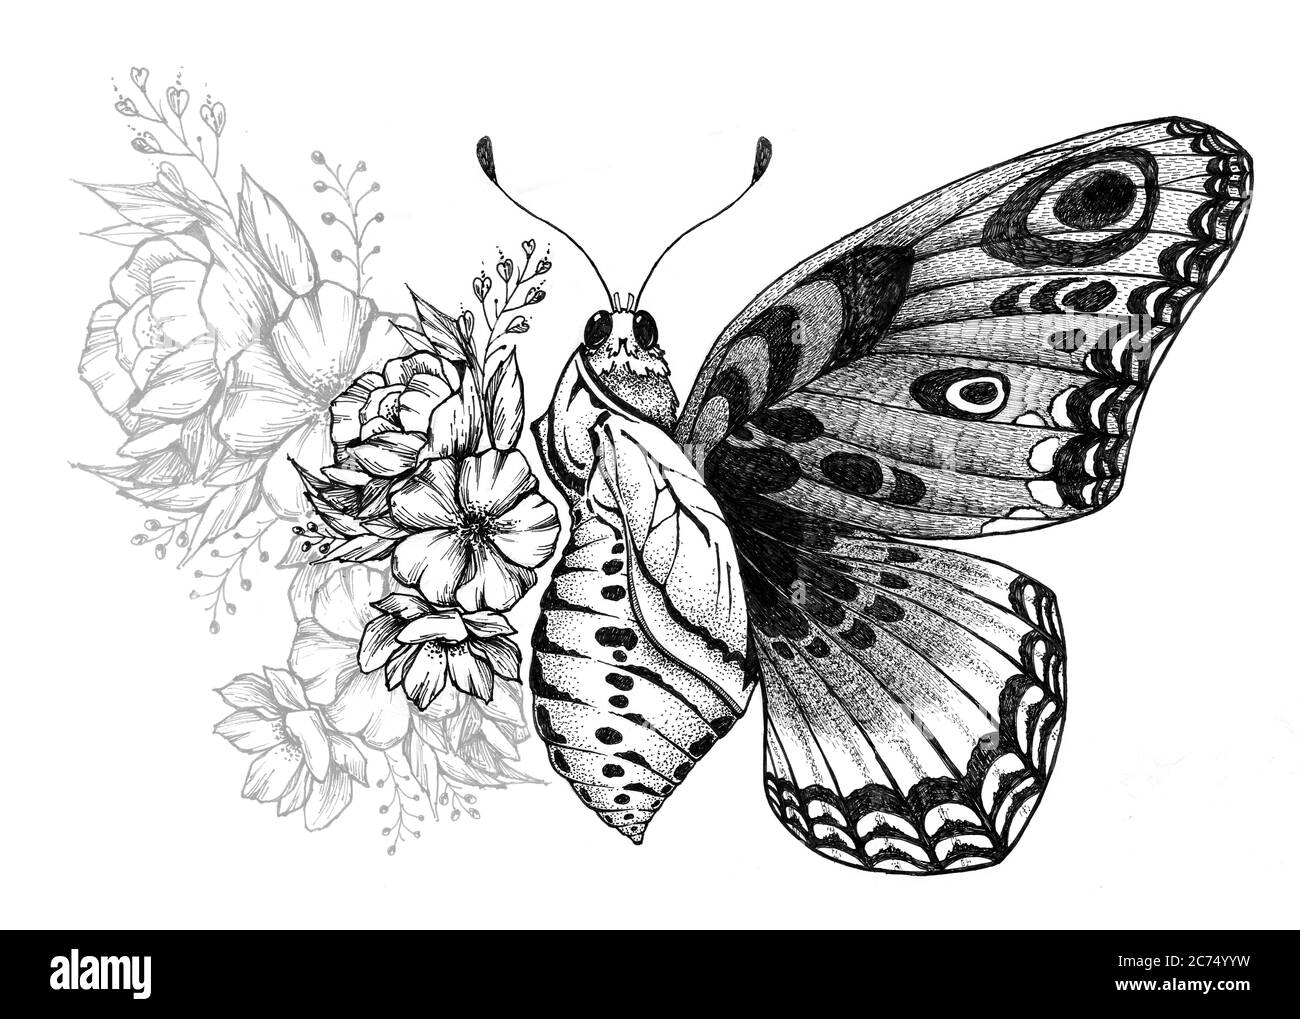 Spiders Traditional Tattoo Designs | PDF Reference Designs for Tattoos